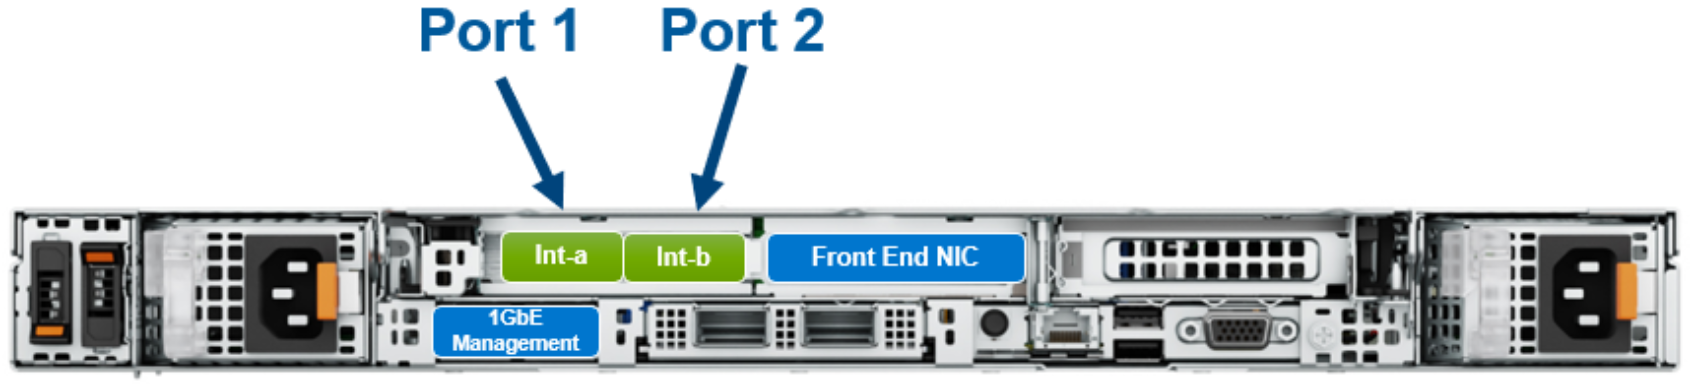 A diagram depicting the rear view highlighting the internal back-end and front-end NIC ports for the F210 node.